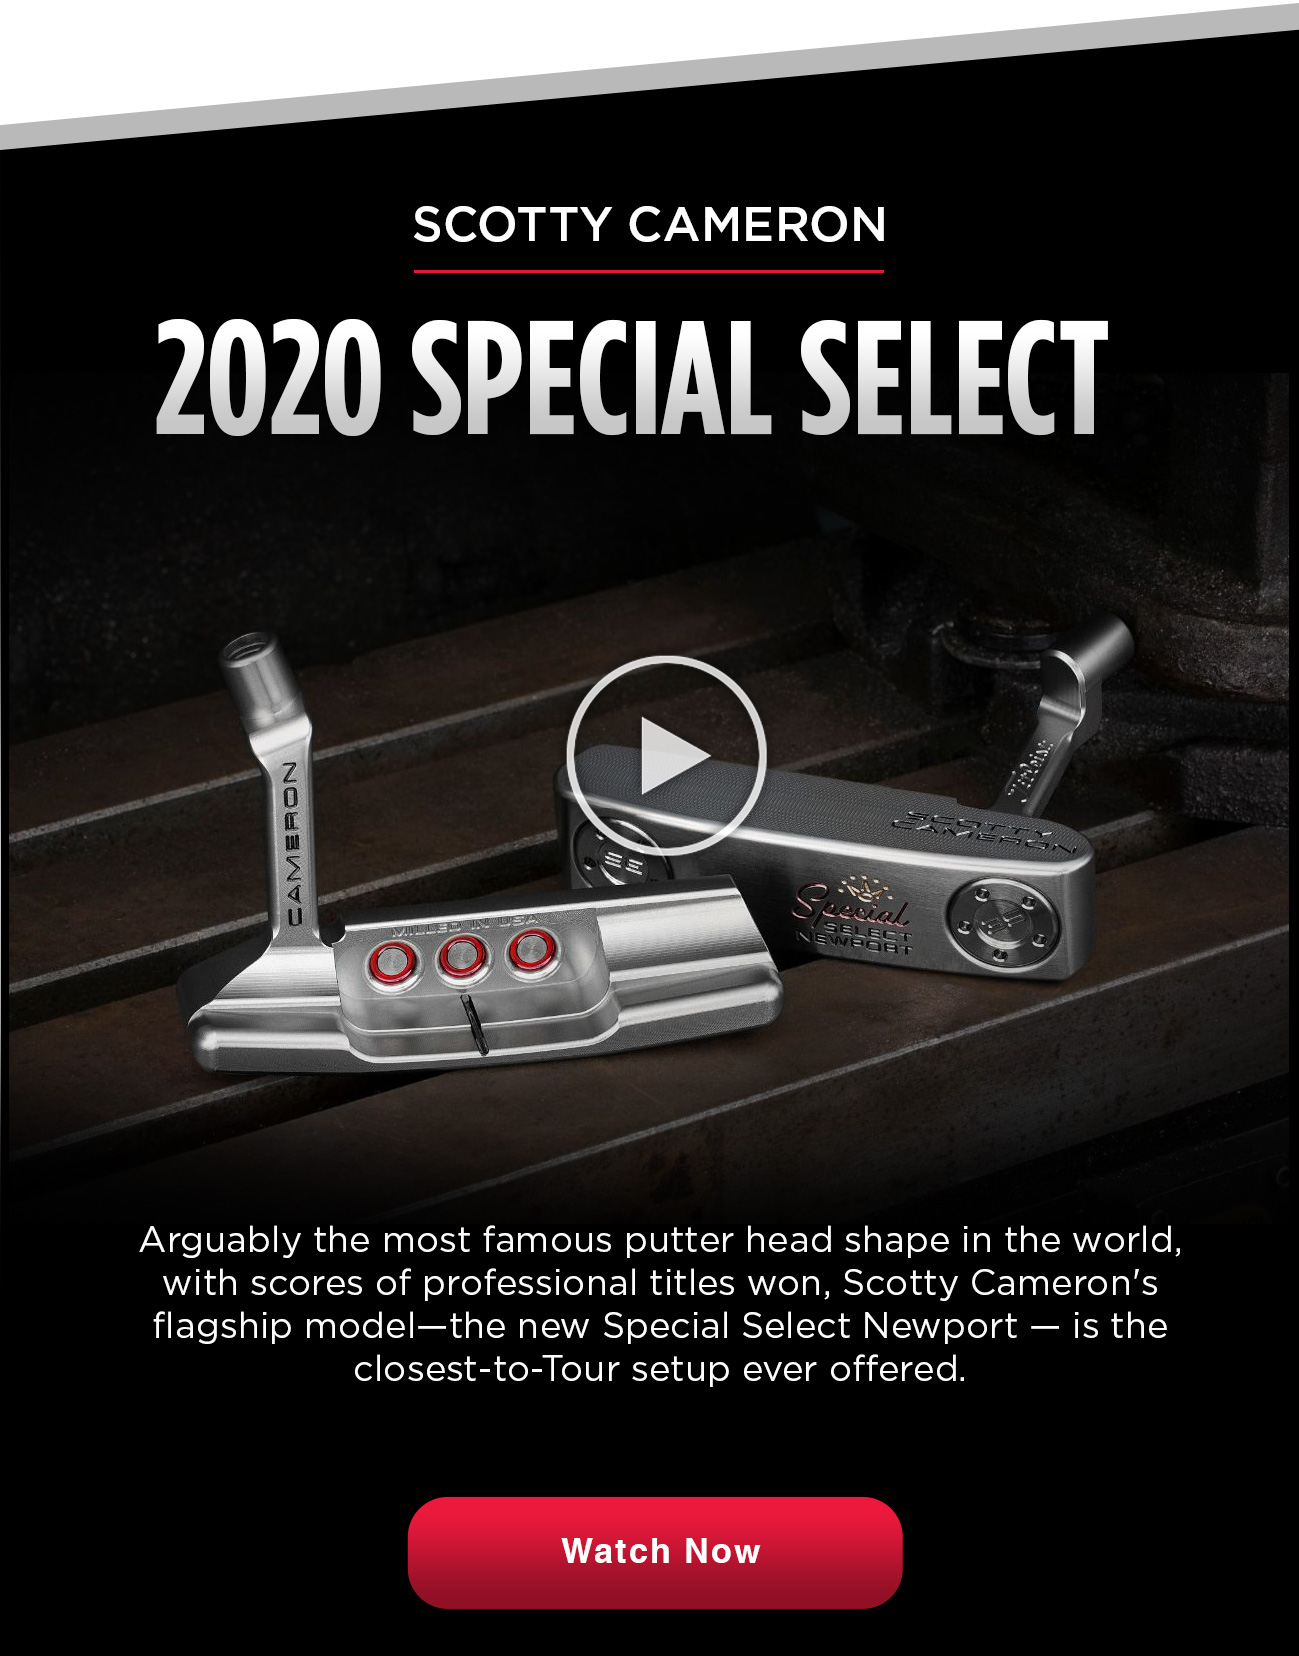 2020 Special Select